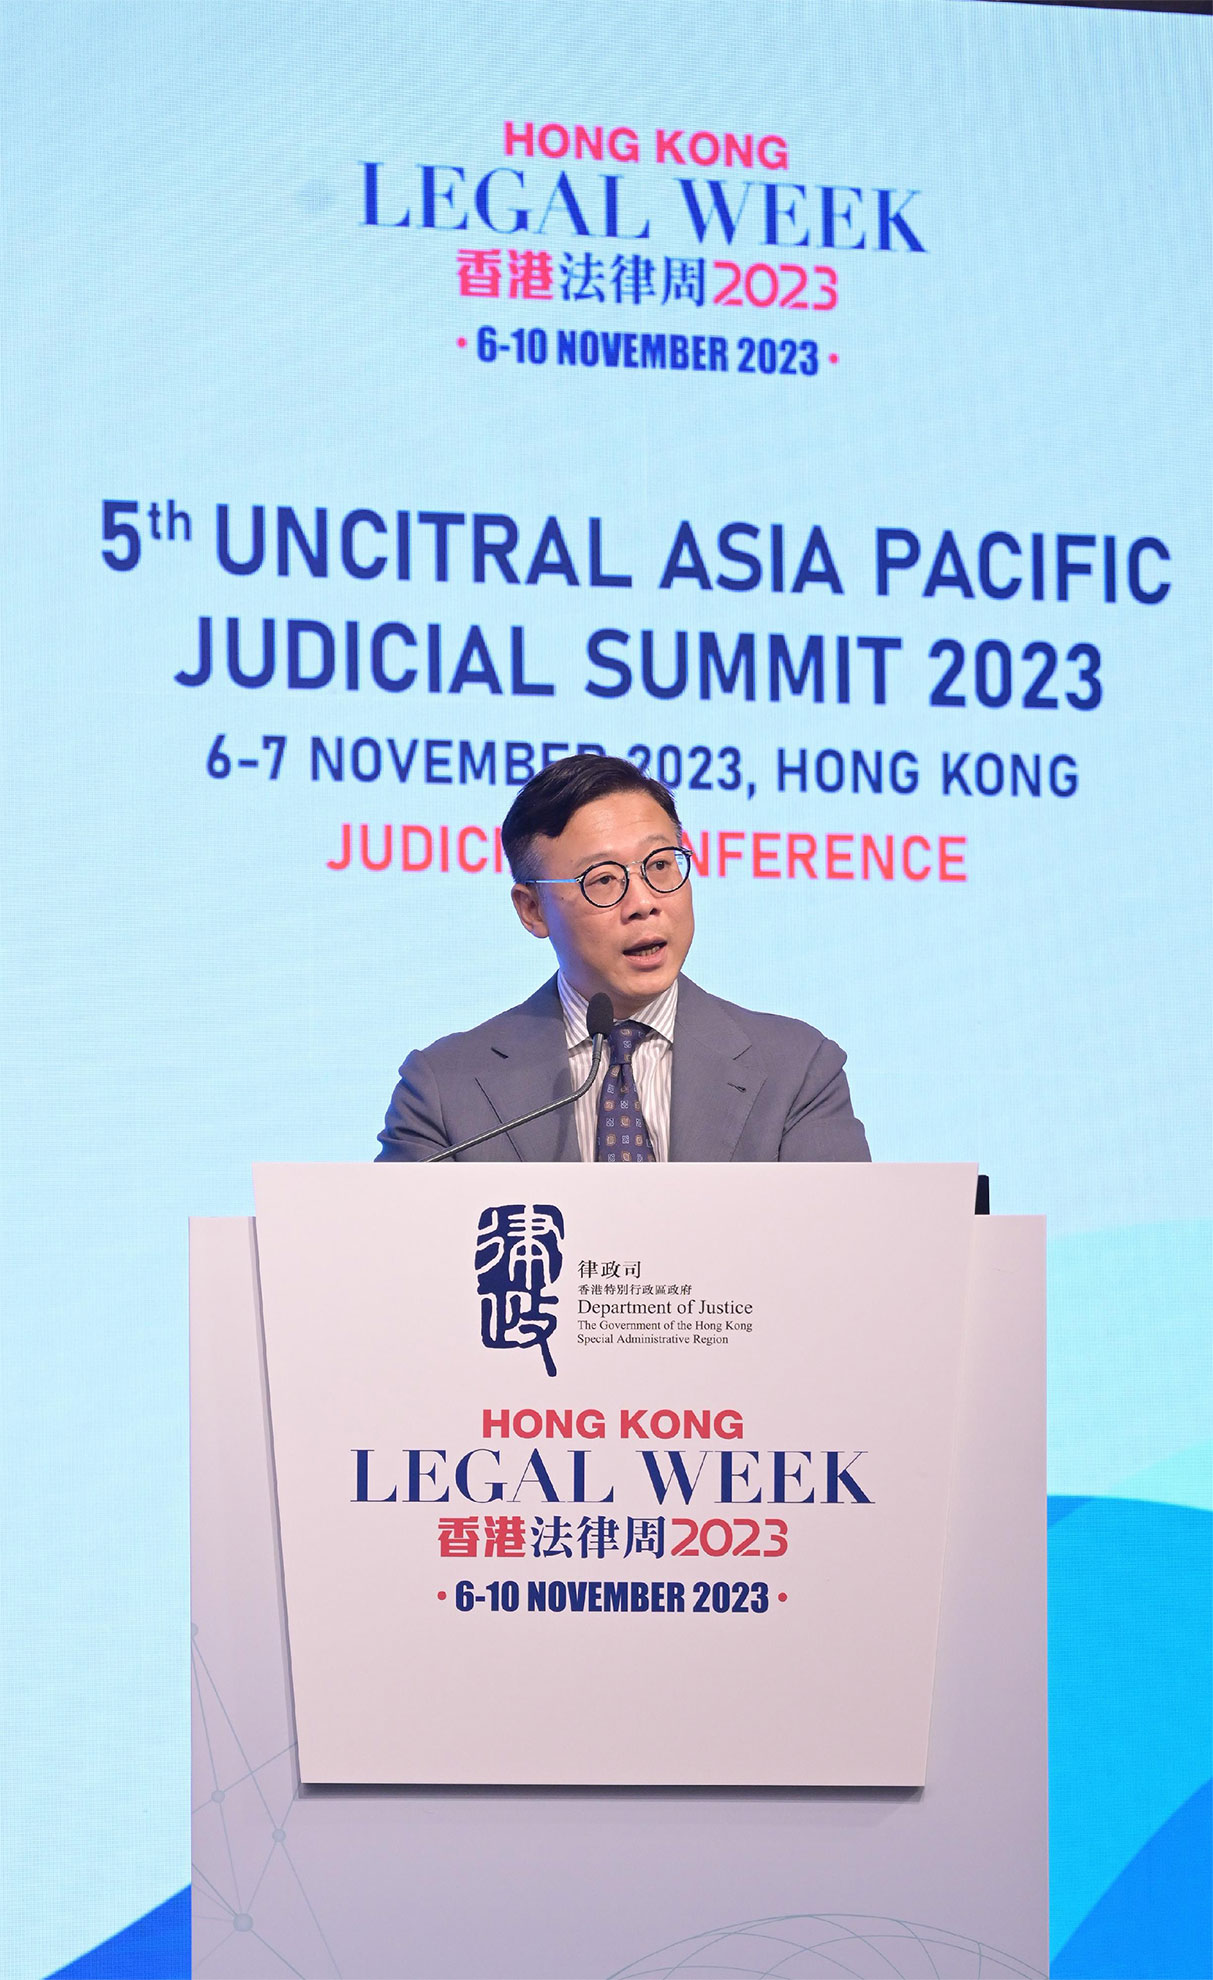 The Deputy Secretary for Justice, Mr Cheung Kwok-kwan, delivers closing remarks at the 5th UNCITRAL Asia Pacific Judicial Summit - Judicial Conference under the Hong Kong Legal Week 2023 today (November 6).